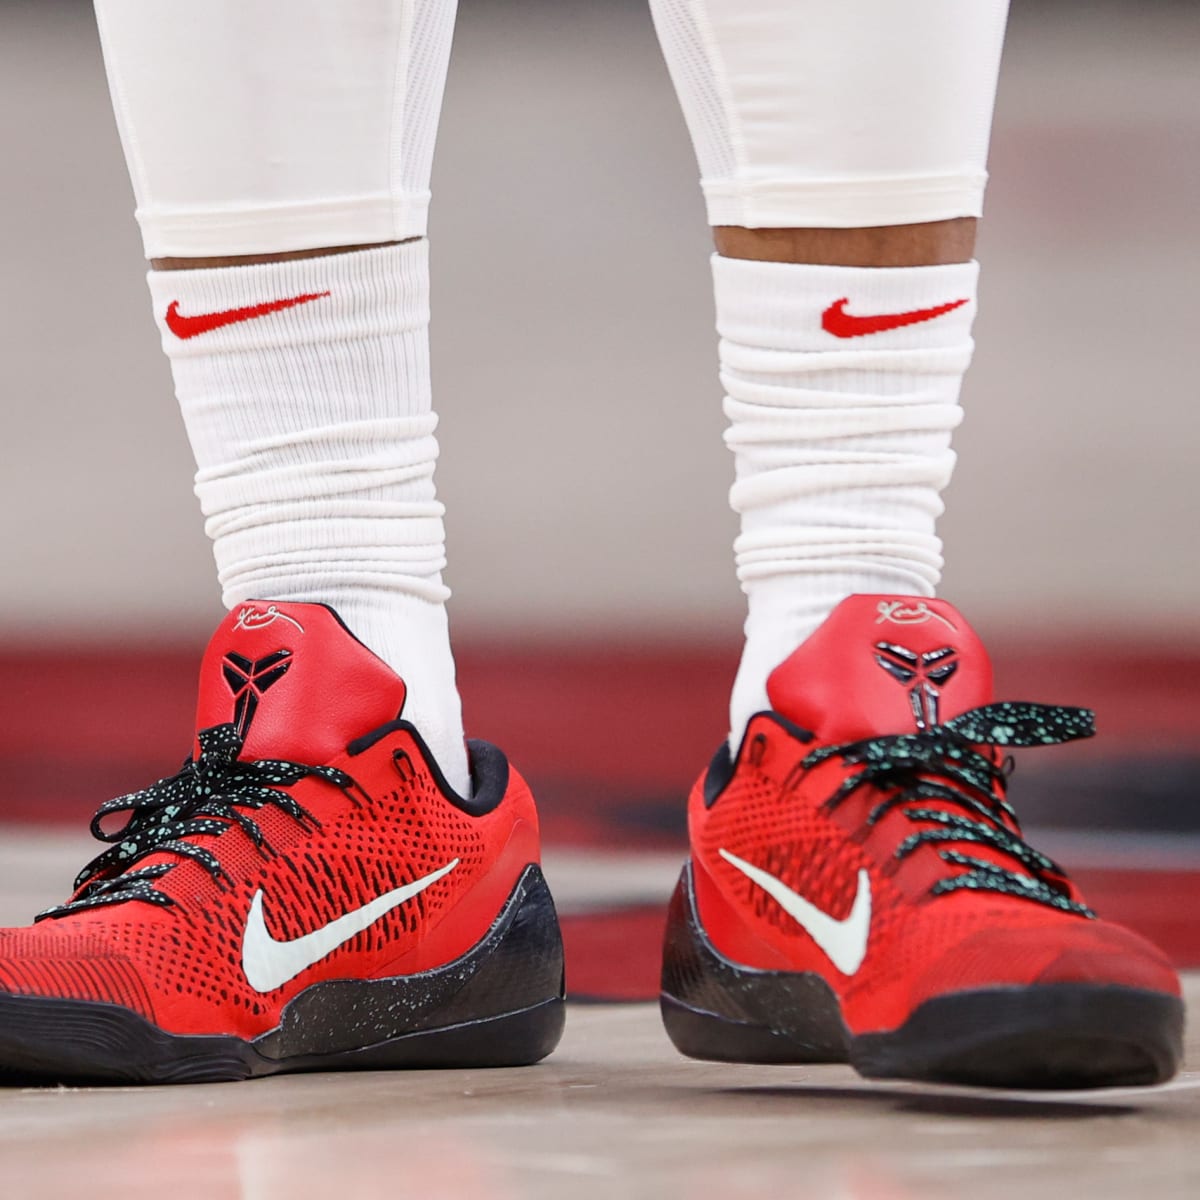 demar_derozan brought out his Kobe 6 PE inspired by the @wnba